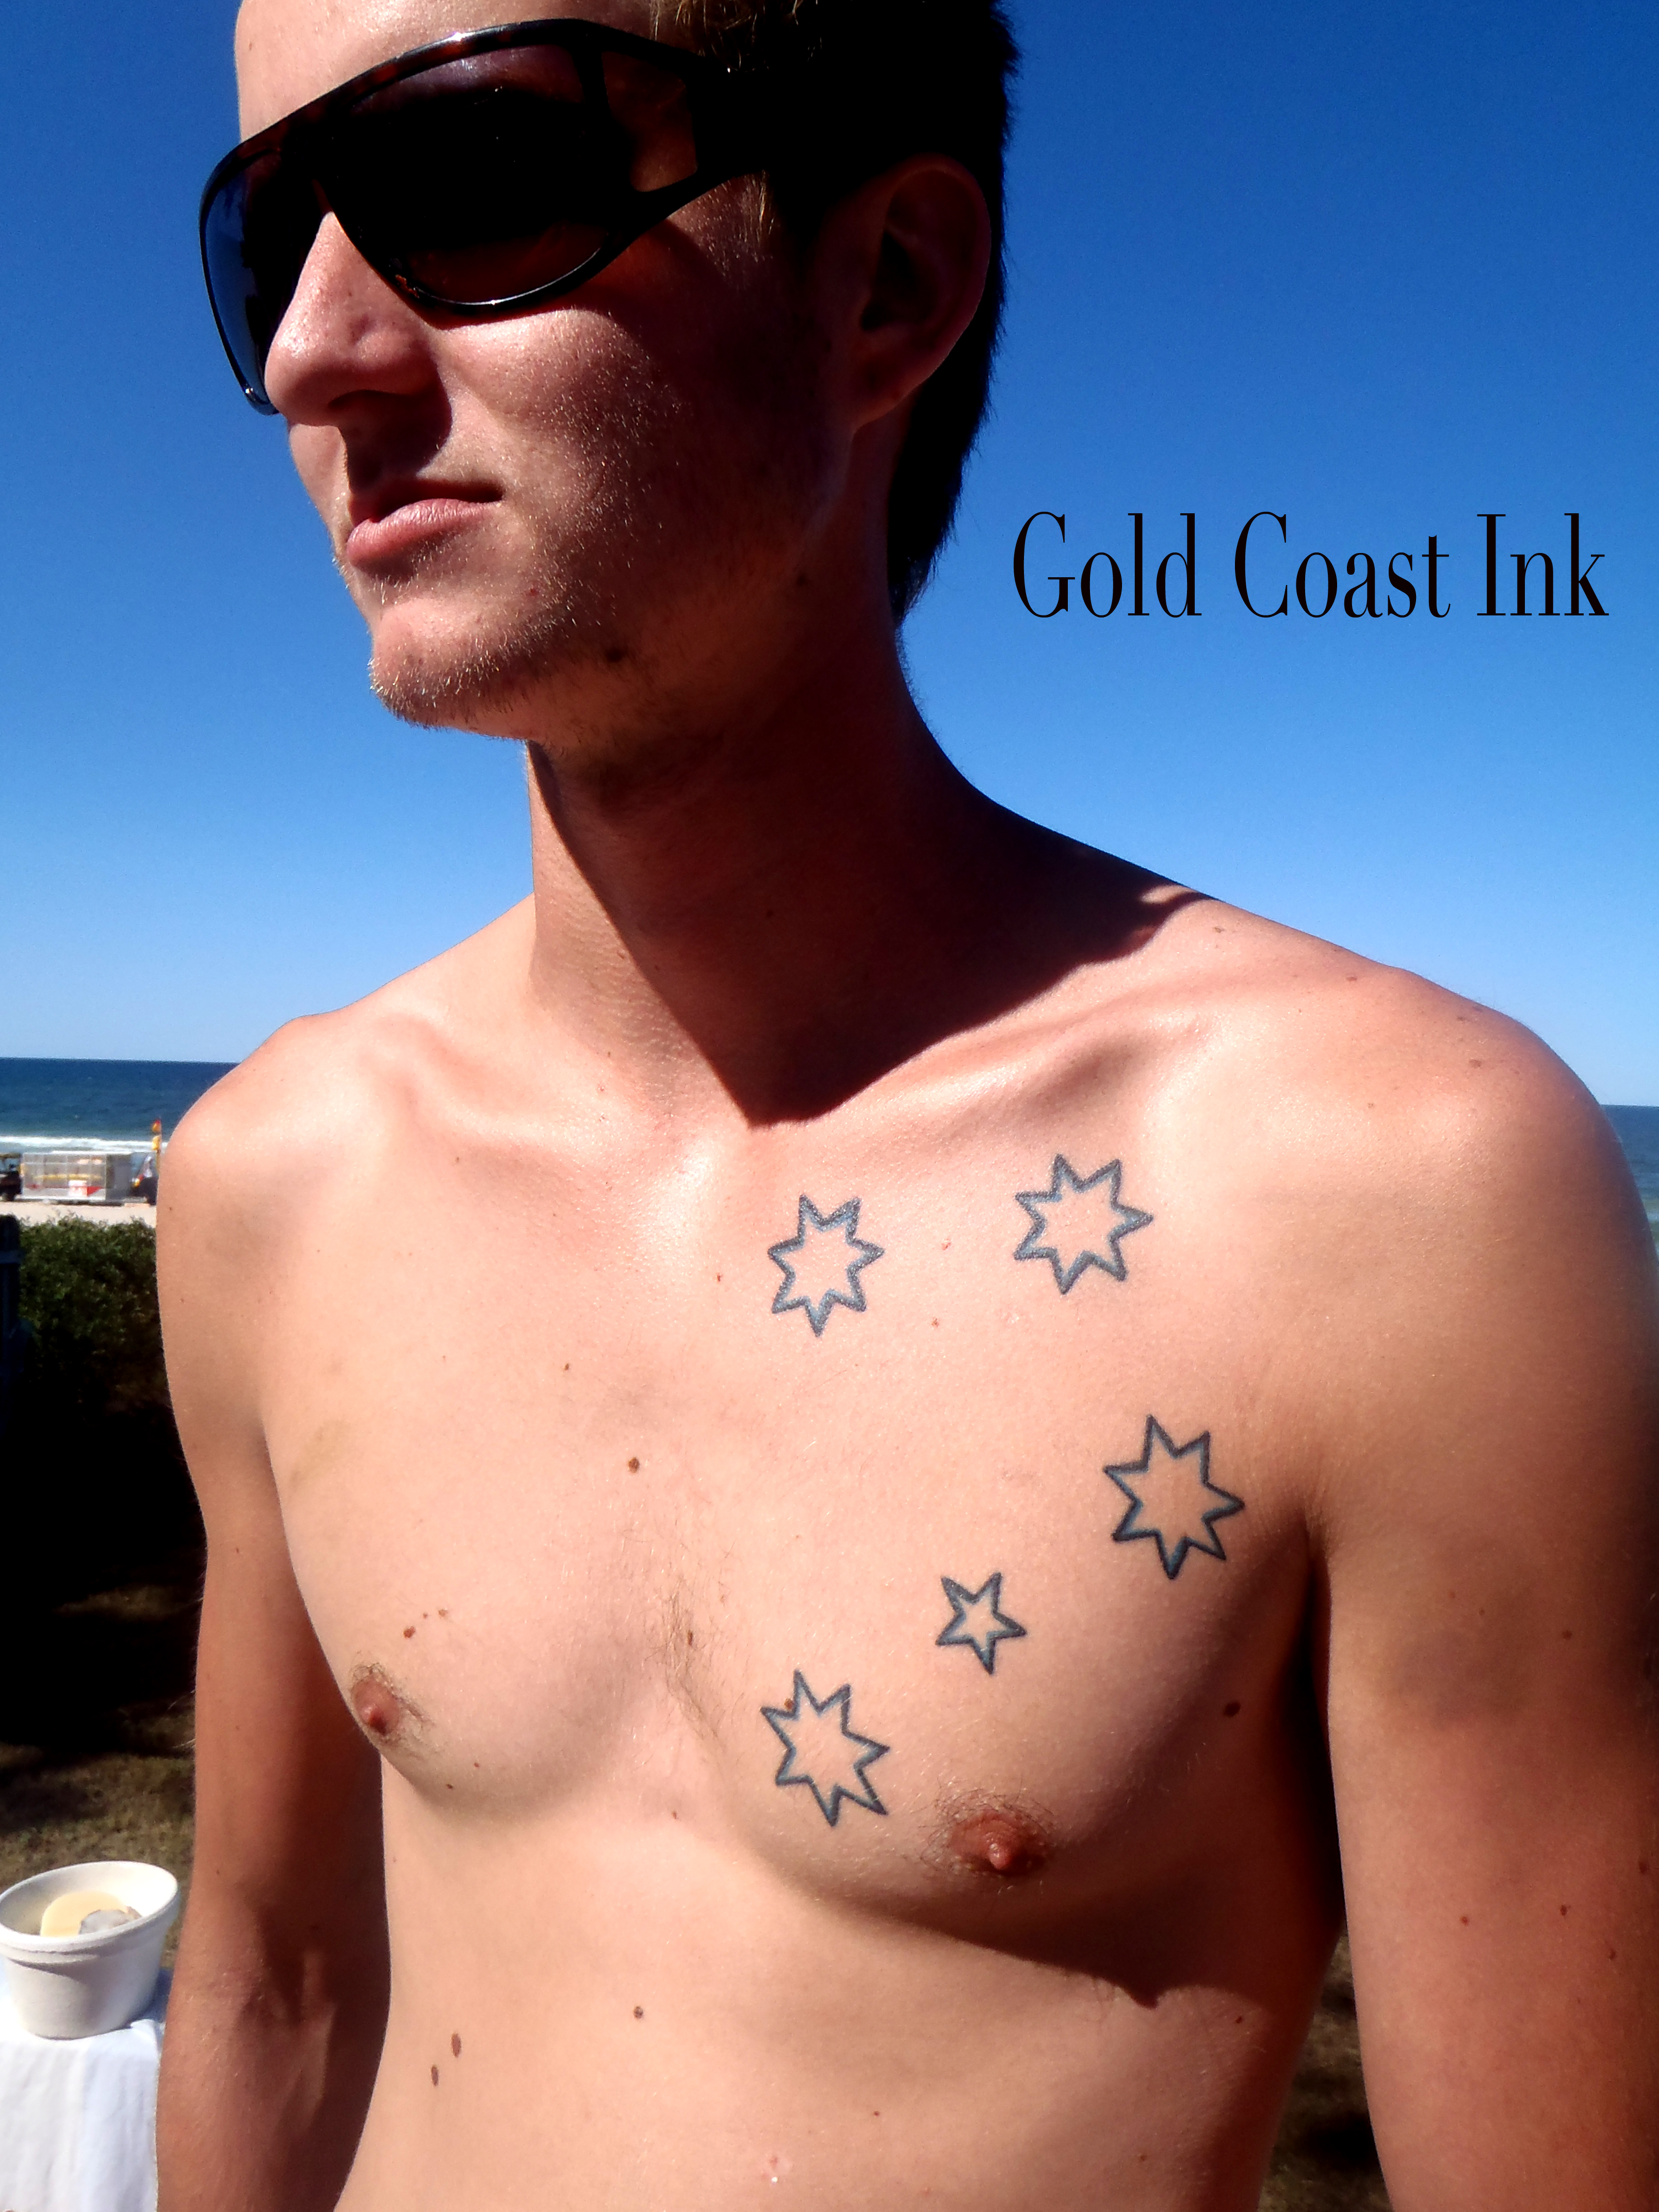 Southern Cross Tattoo Nationalist Or Racist Ink Gold Coast in dimensions 3216 X 4288